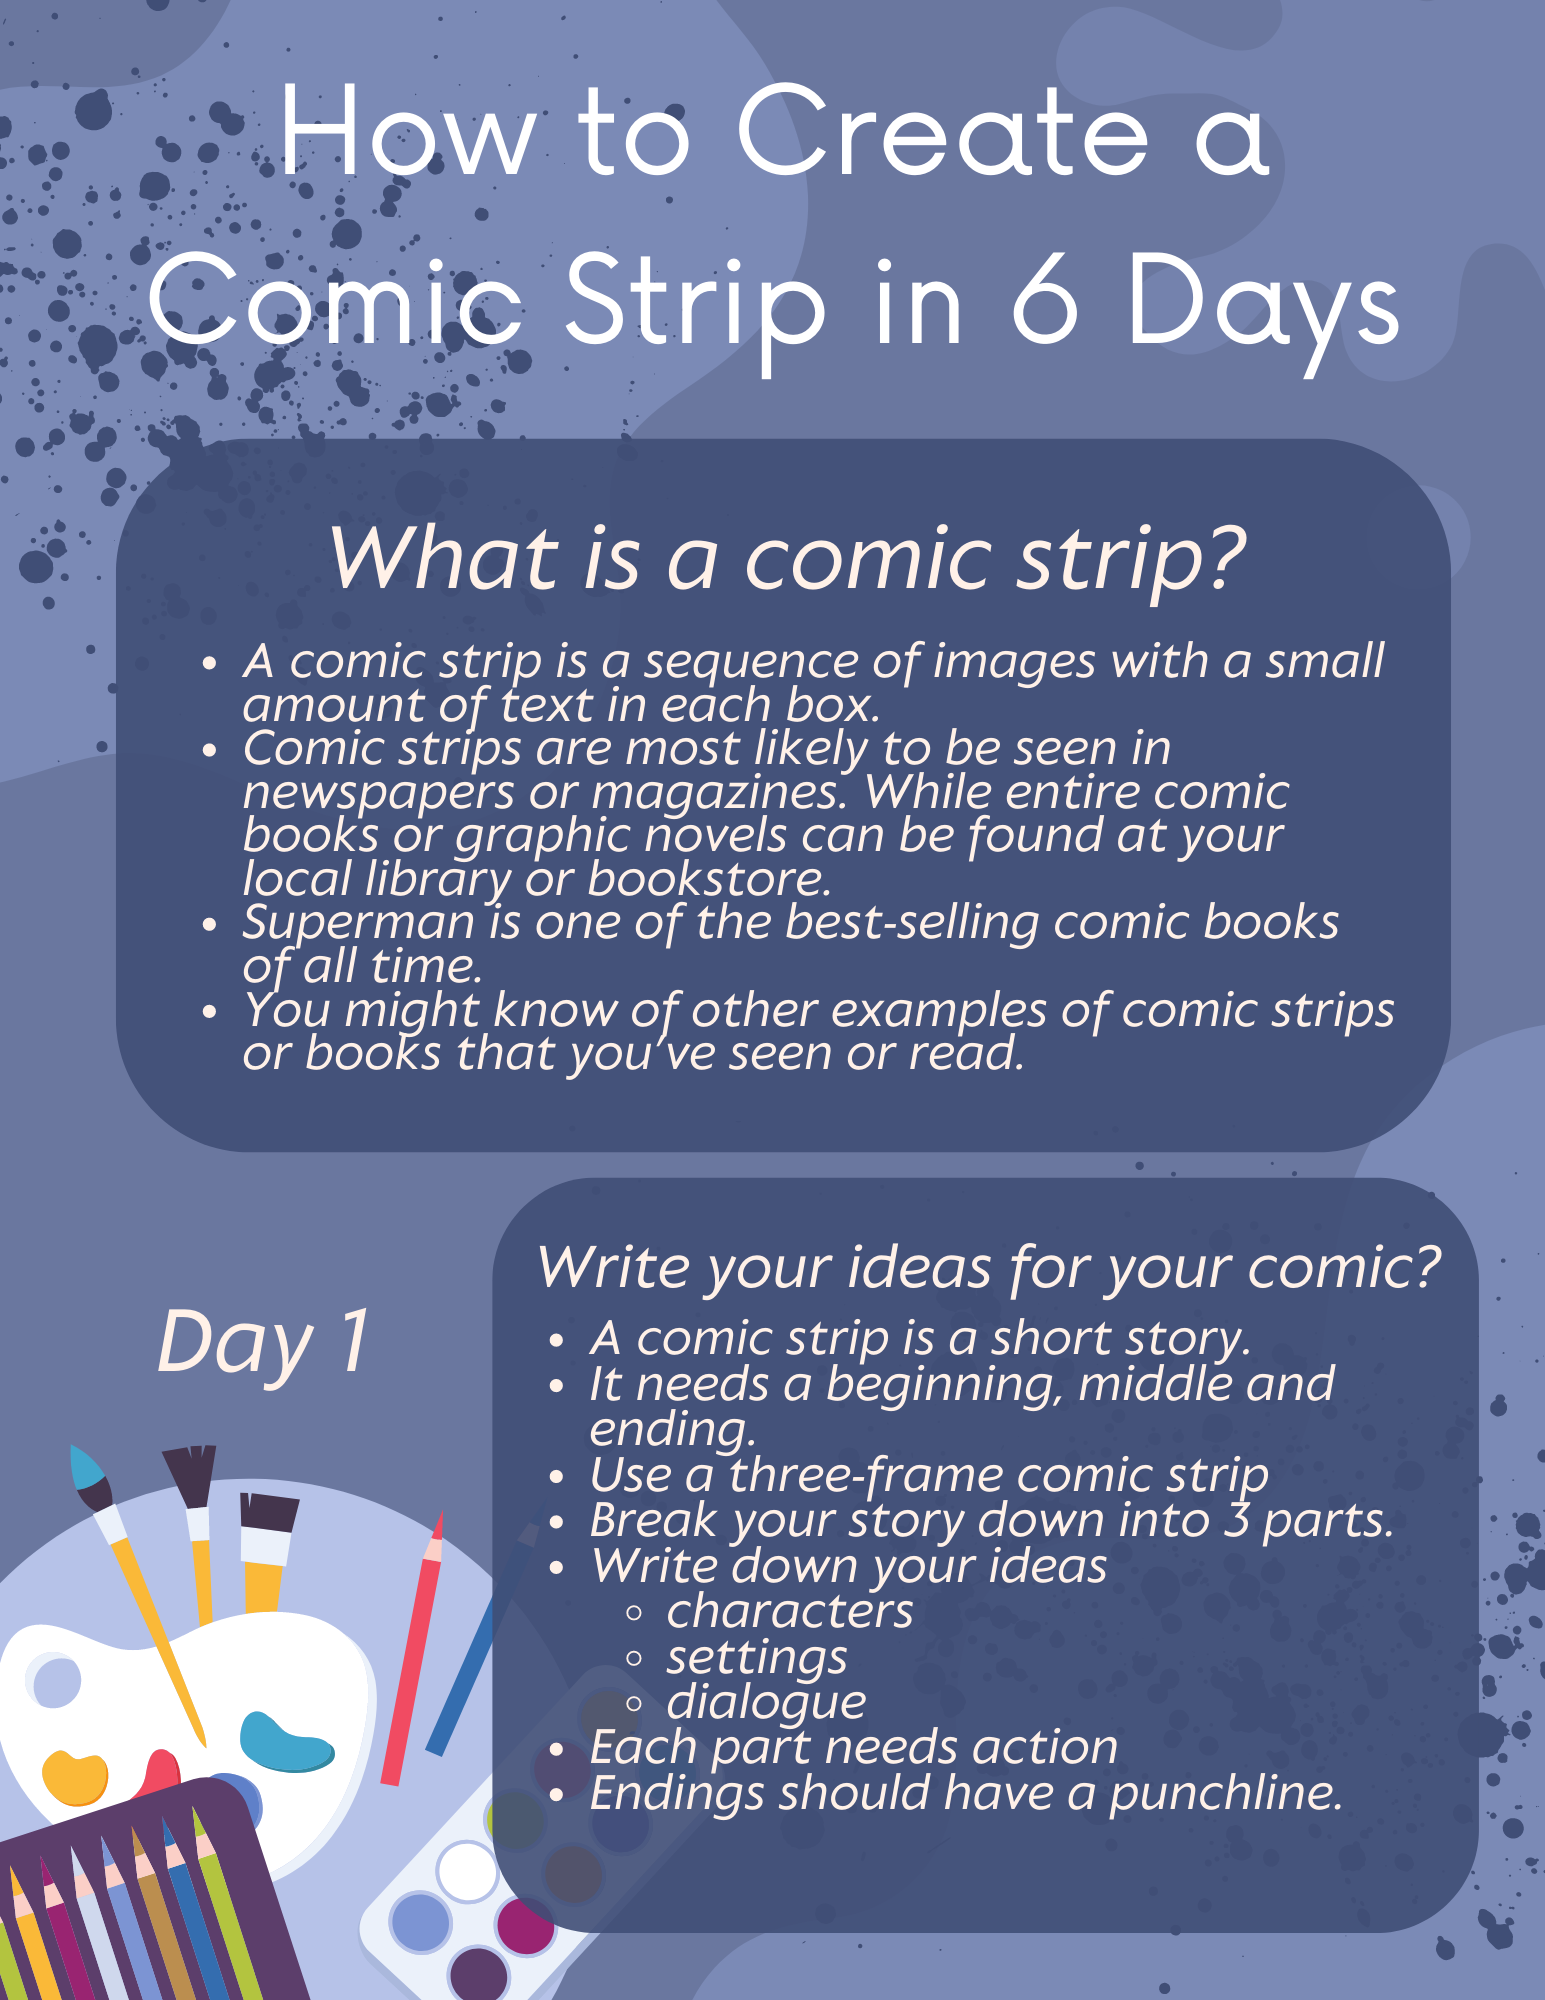 How To Draw A Commic In 6 Days.